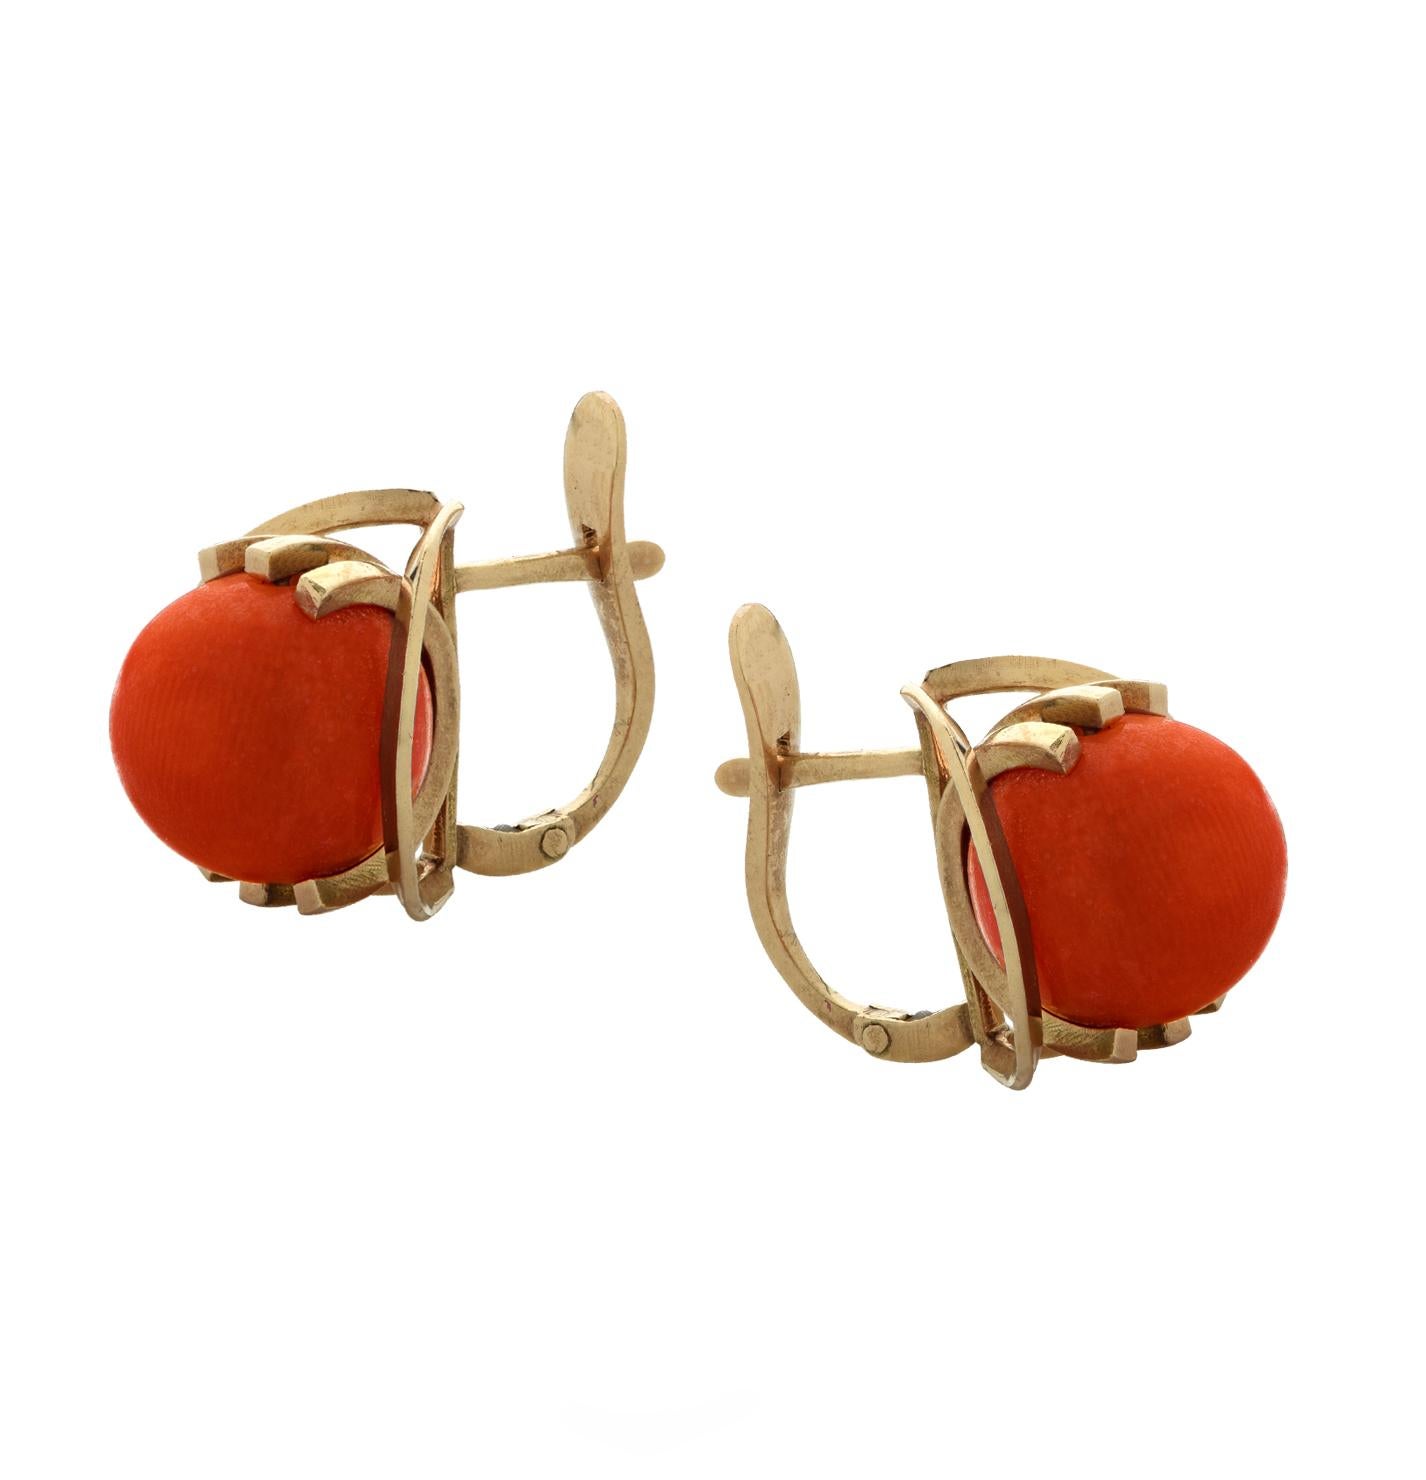 Beautiful French earrings crafted in 18 karat yellow gold featuring two salmon coral beads cradled in gold prongs floating on a gold rim. These celestial earrings measure .48 of an inch in width and 0.5 of an inch in length and weigh 6.6 grams.  